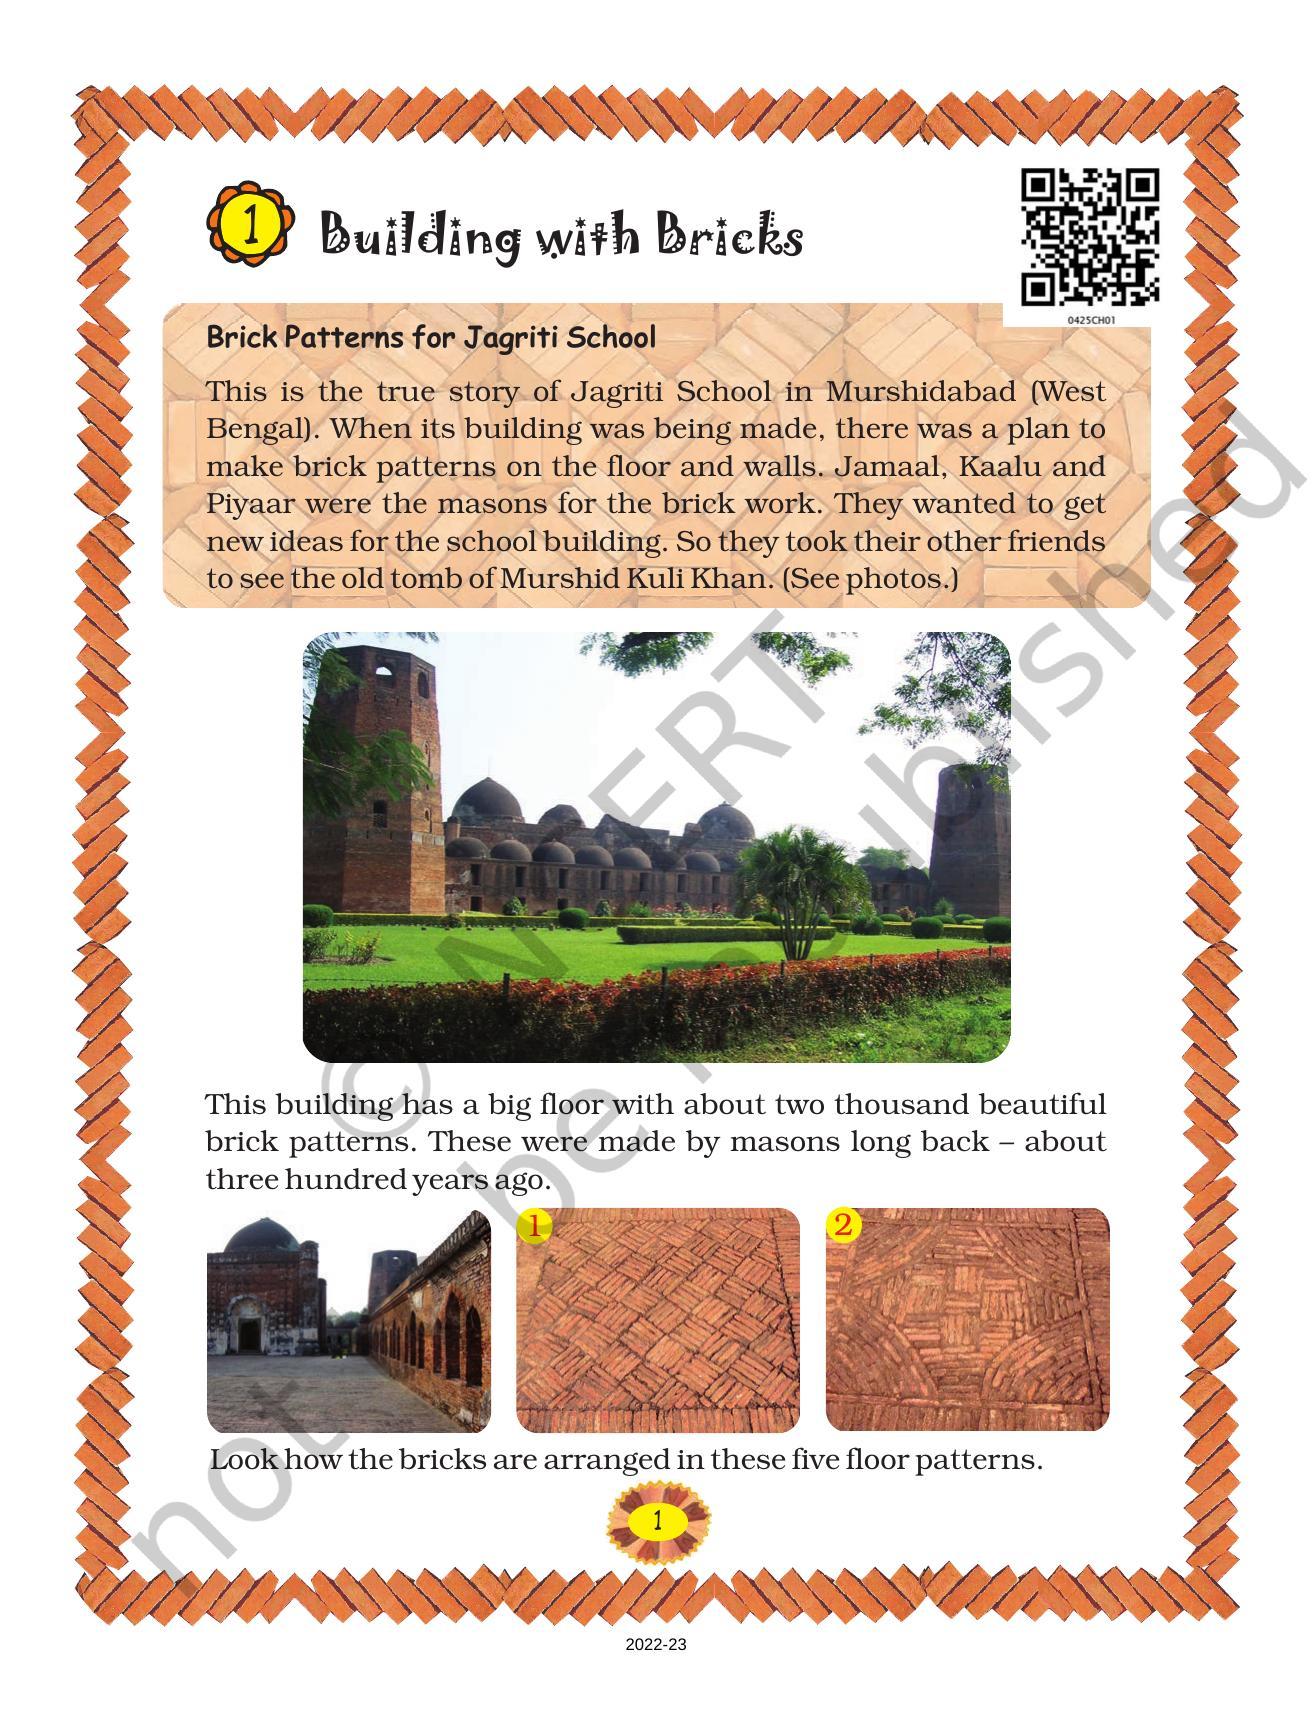 NCERT Book for Class 4 Maths Chapter 1 Building with Bricks - Page 1